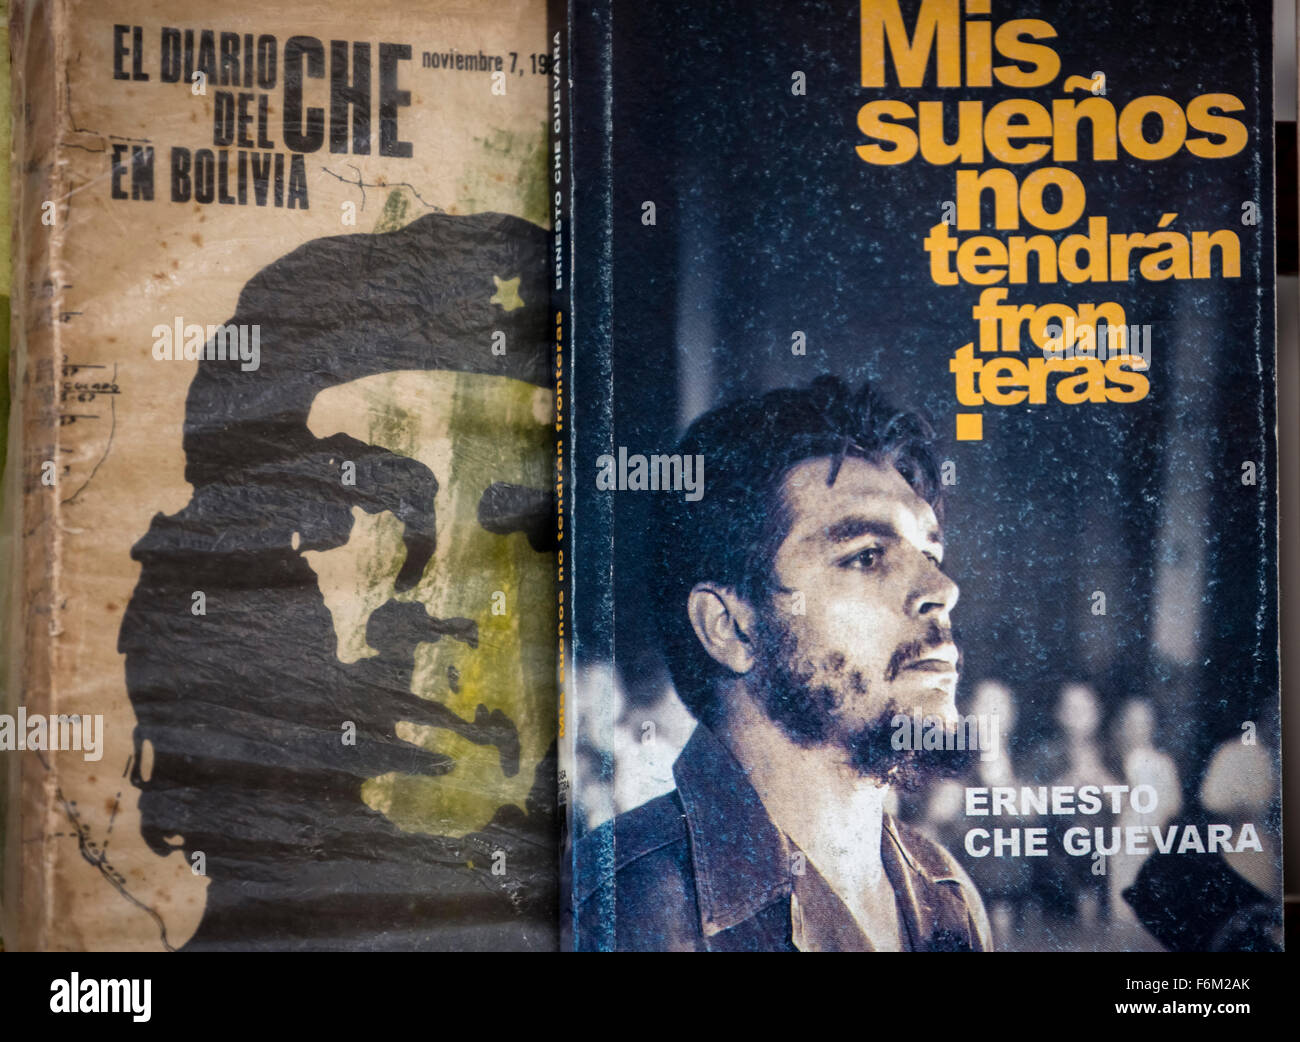 Antiquarian, used books on Ernesto Che Guevara and Fidel Castro at the flea market in the streets of Old Havana, Hero Stock Photo